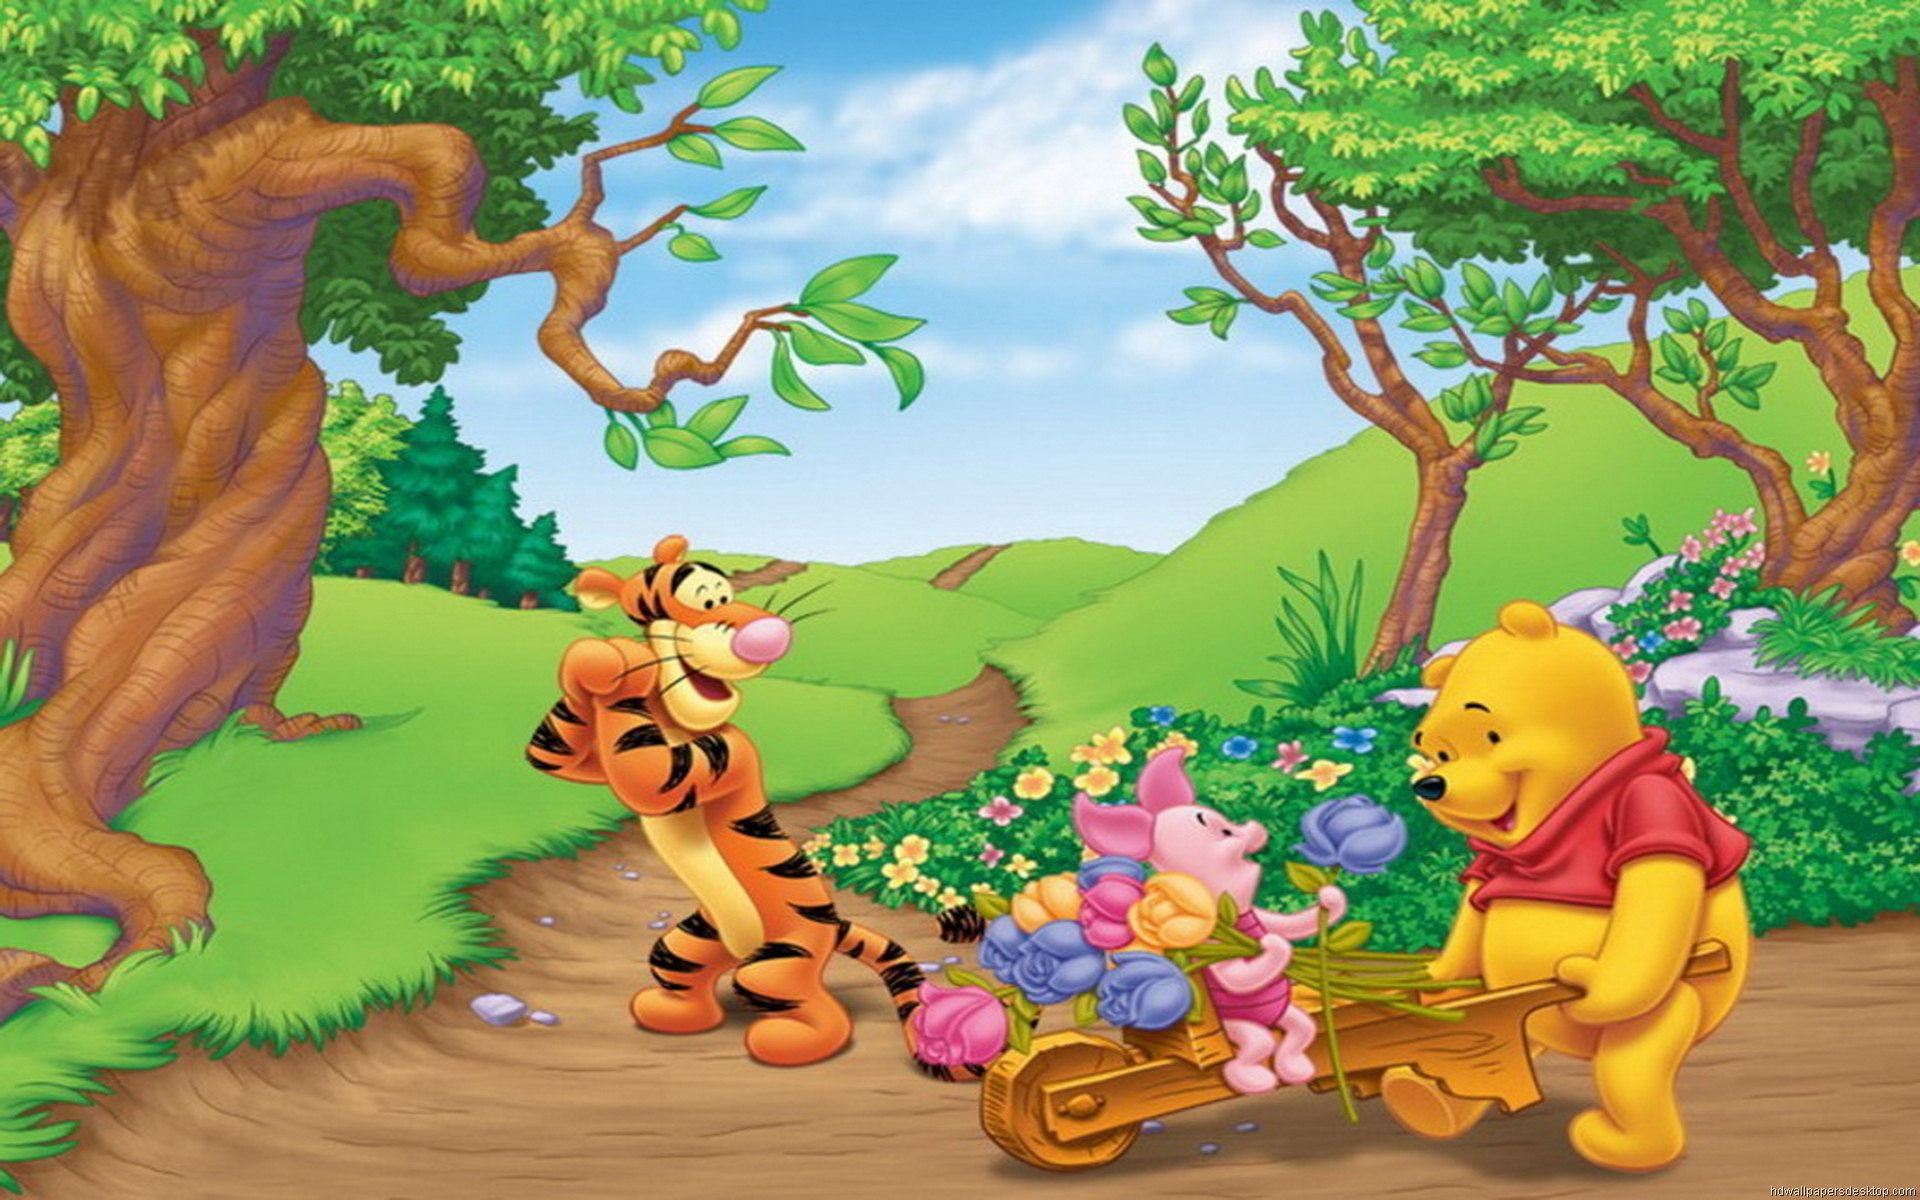 1920x1200 Free download Winnie the Pooh Computer Wallpaper [] for your Desktop, Mobile \u0026 Tablet | Explore 45+ Winnie the Pooh Easter Wallpaper | Baby Winnie the Pooh Wallpaper, Winnie the Pooh Eeyore